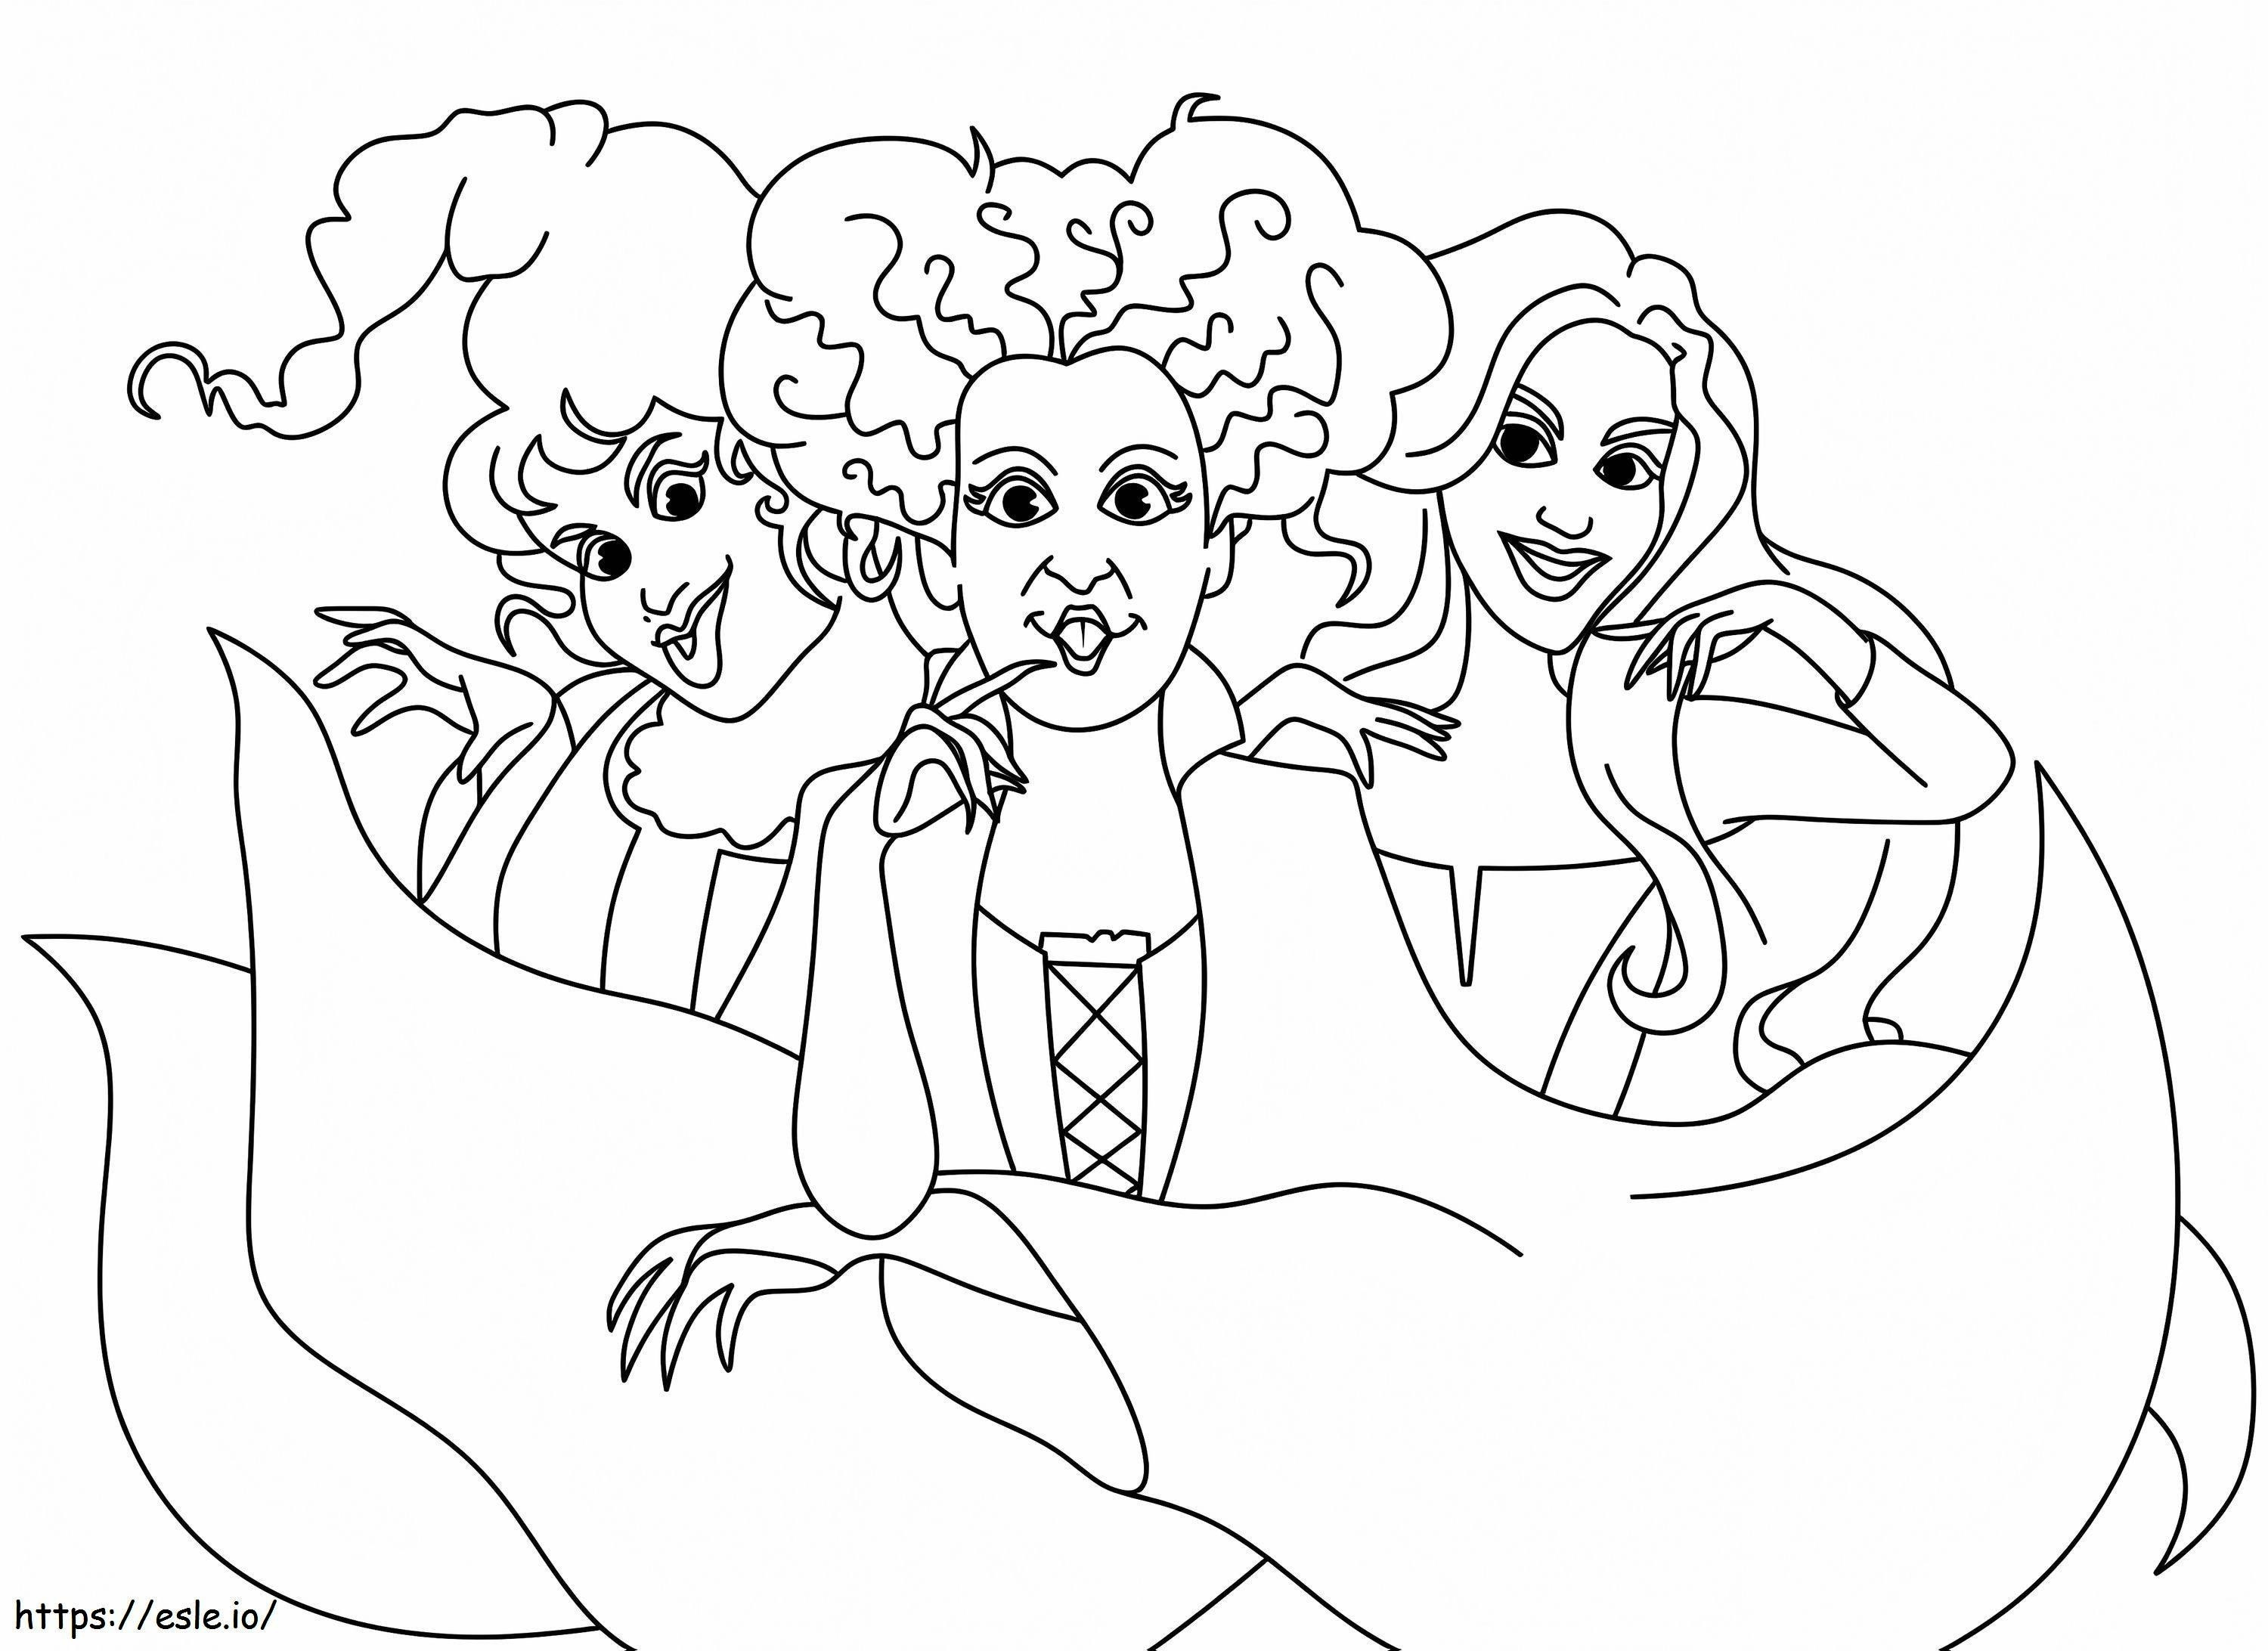 Sanderson Sisters From Hocus Pocus coloring page